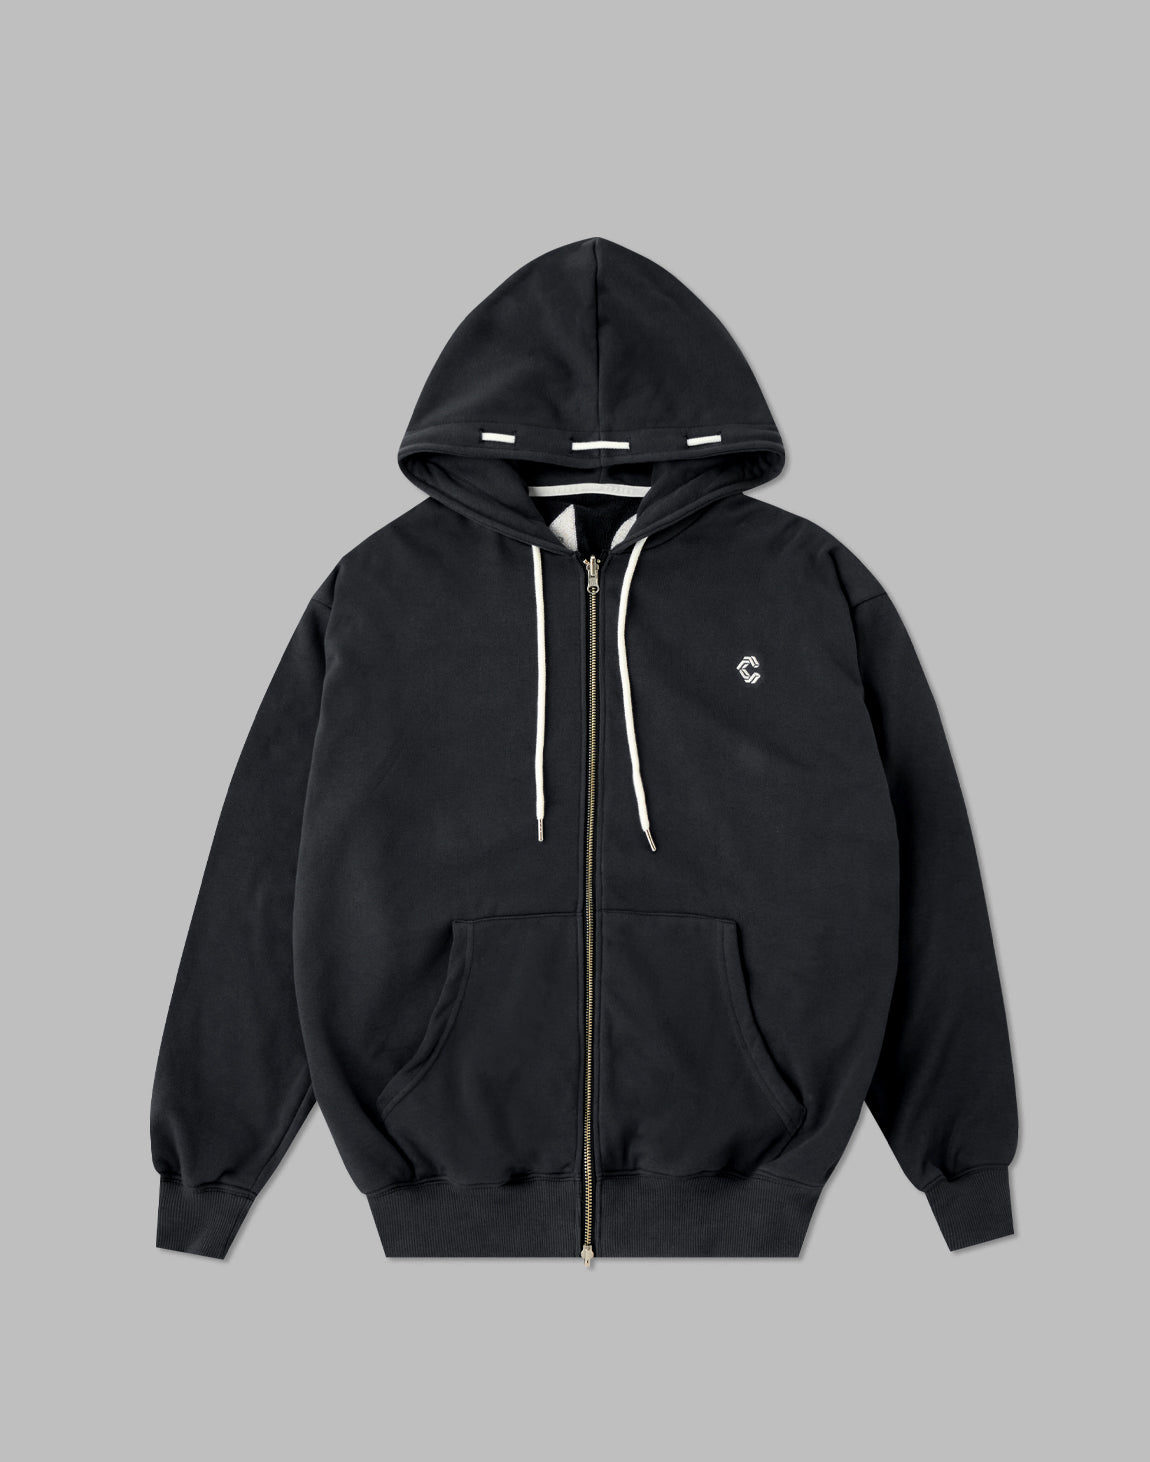 CRONOS ROOM LOGO EMBROIDERY HOODIE – クロノス CRONOS Official Store